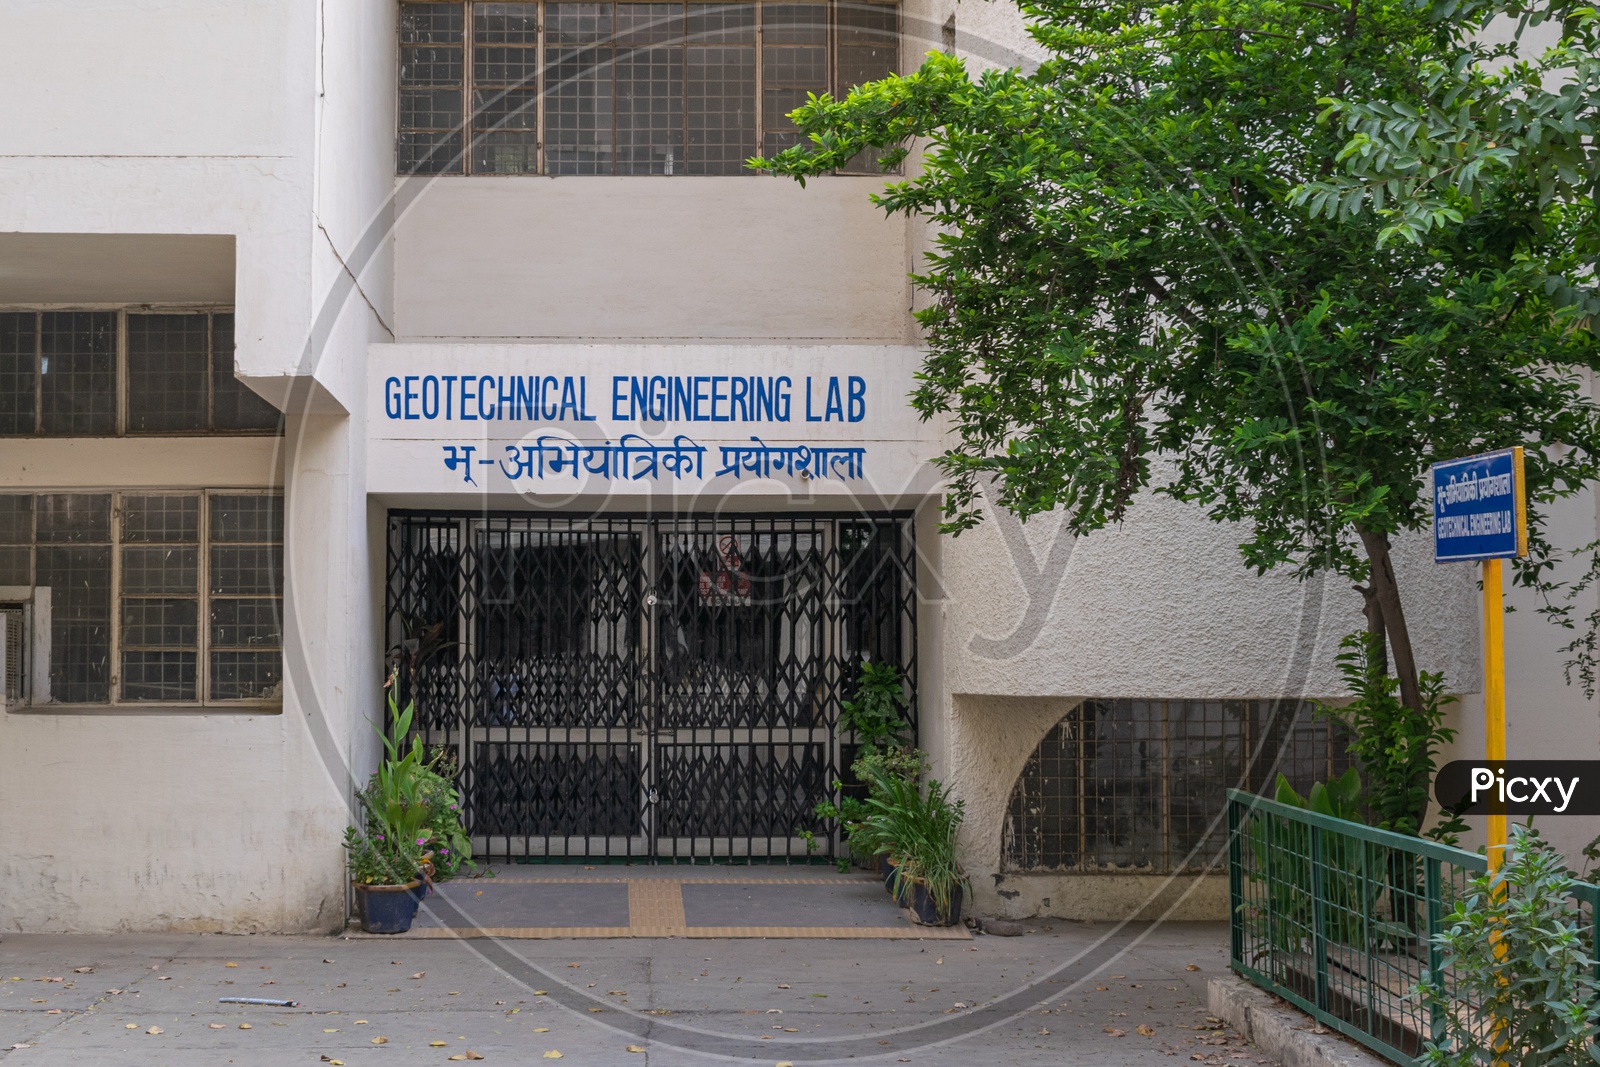 Geotechnical Engineering Lab, Department of Civil Engineering, Indian Institute of Technology Roorkee (IIT Rookee)